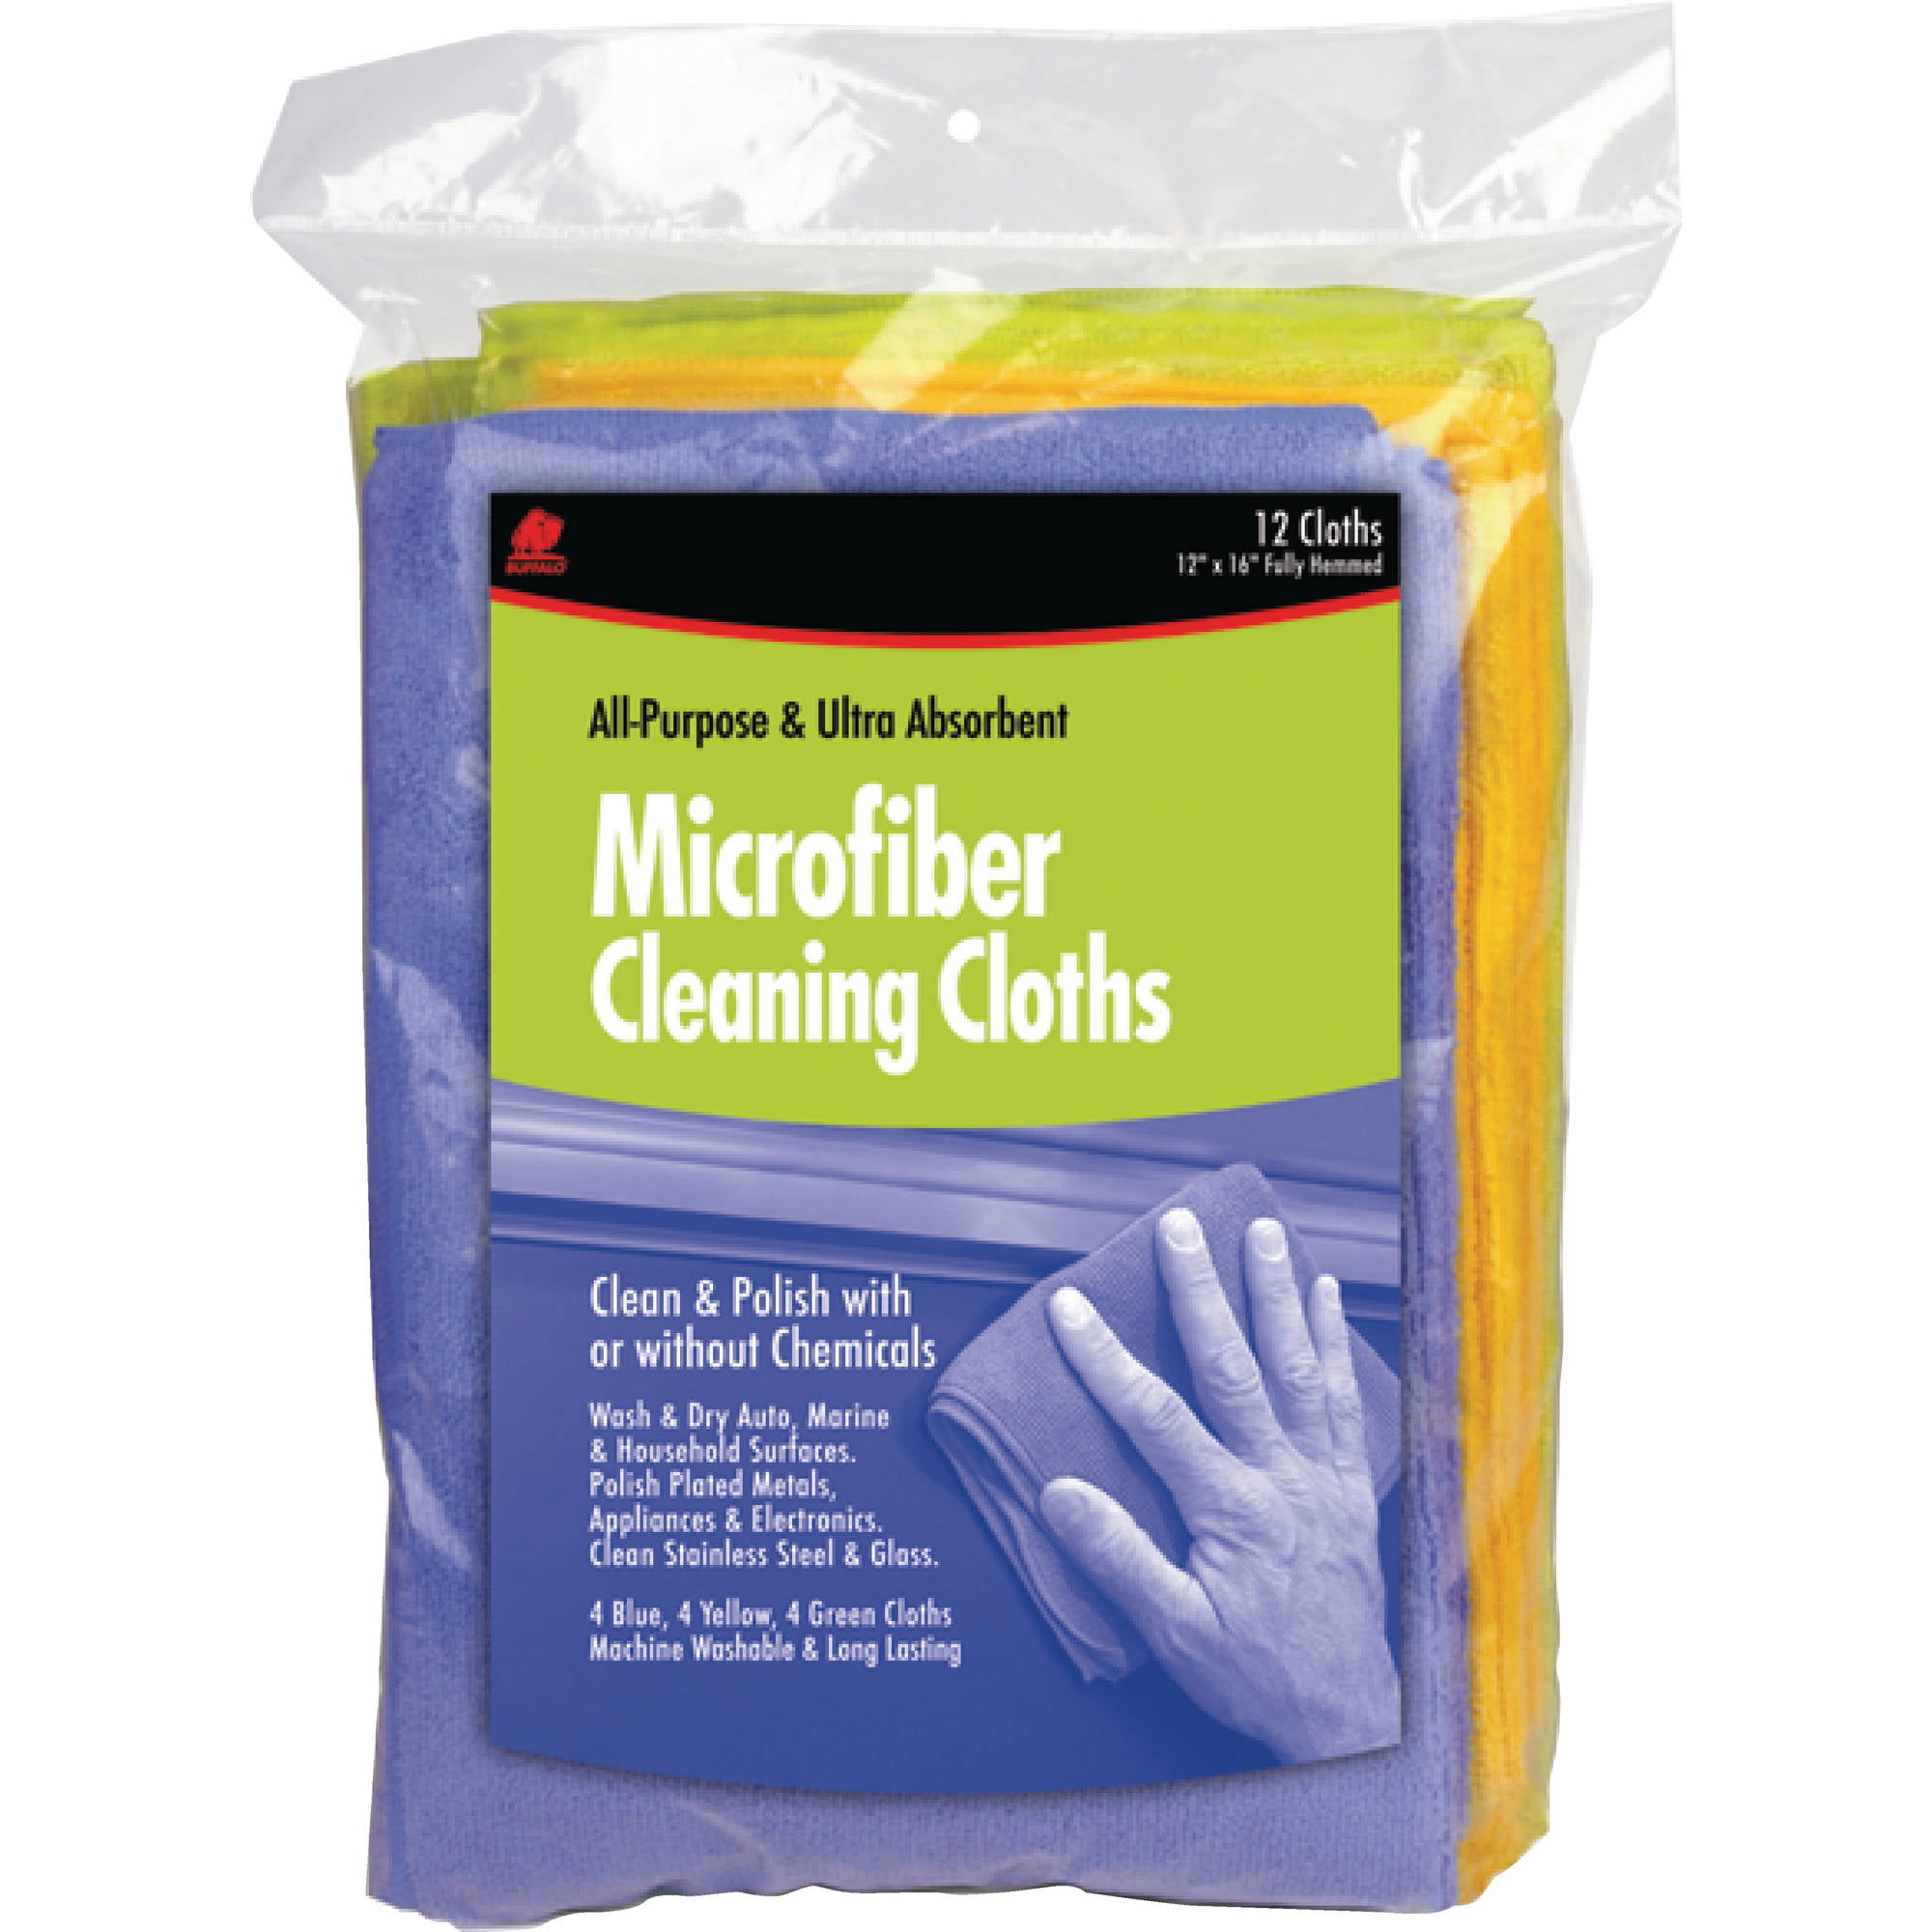 COMFIT Microfiber Cleaning Cloths 16 x 16 for Polishing Stainless Steel Kitchen Appliances & Streak Free Glass 3pk 